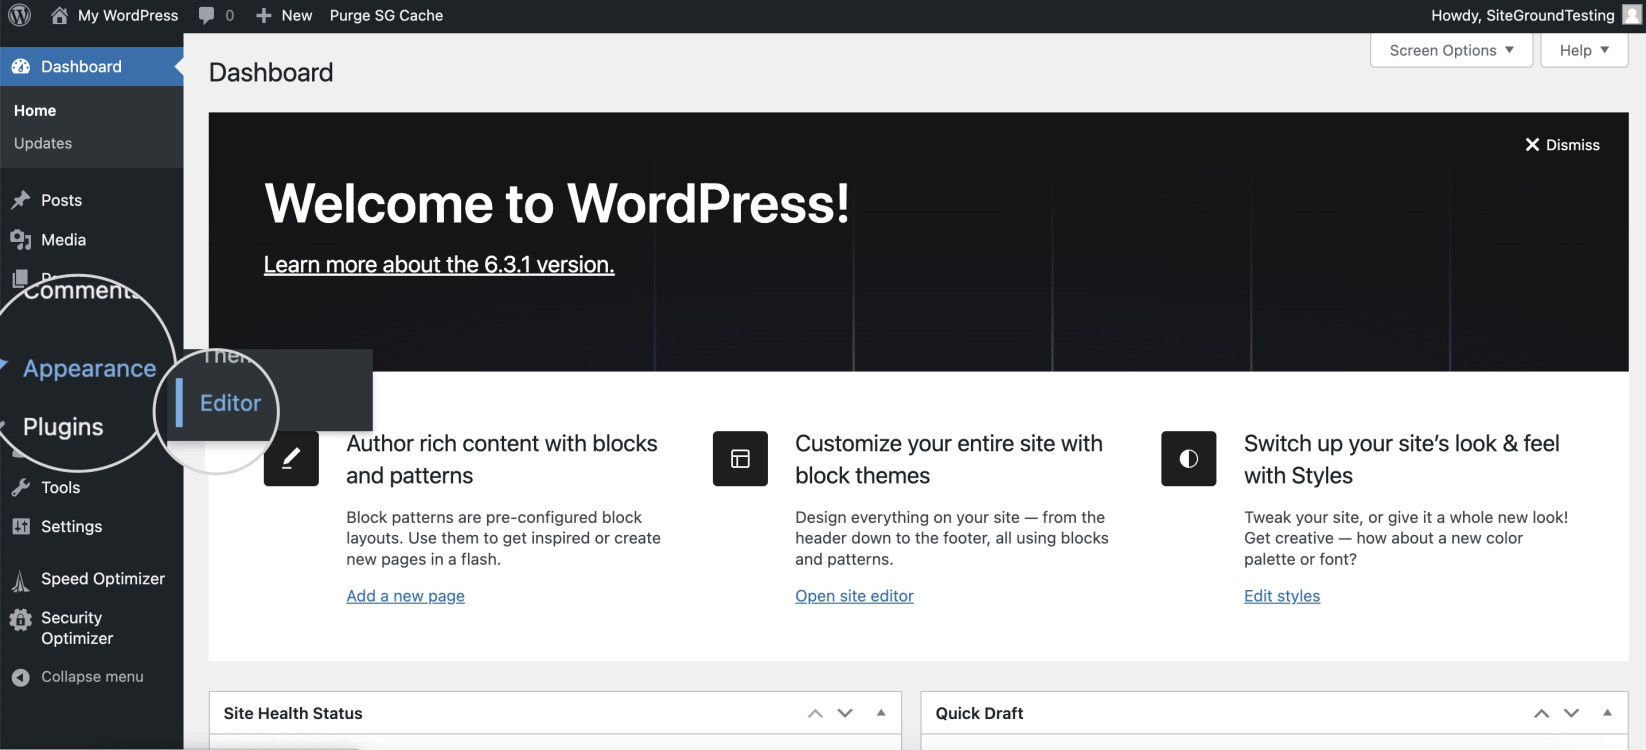 Screenshot showing how to access the WordPress Site Editor